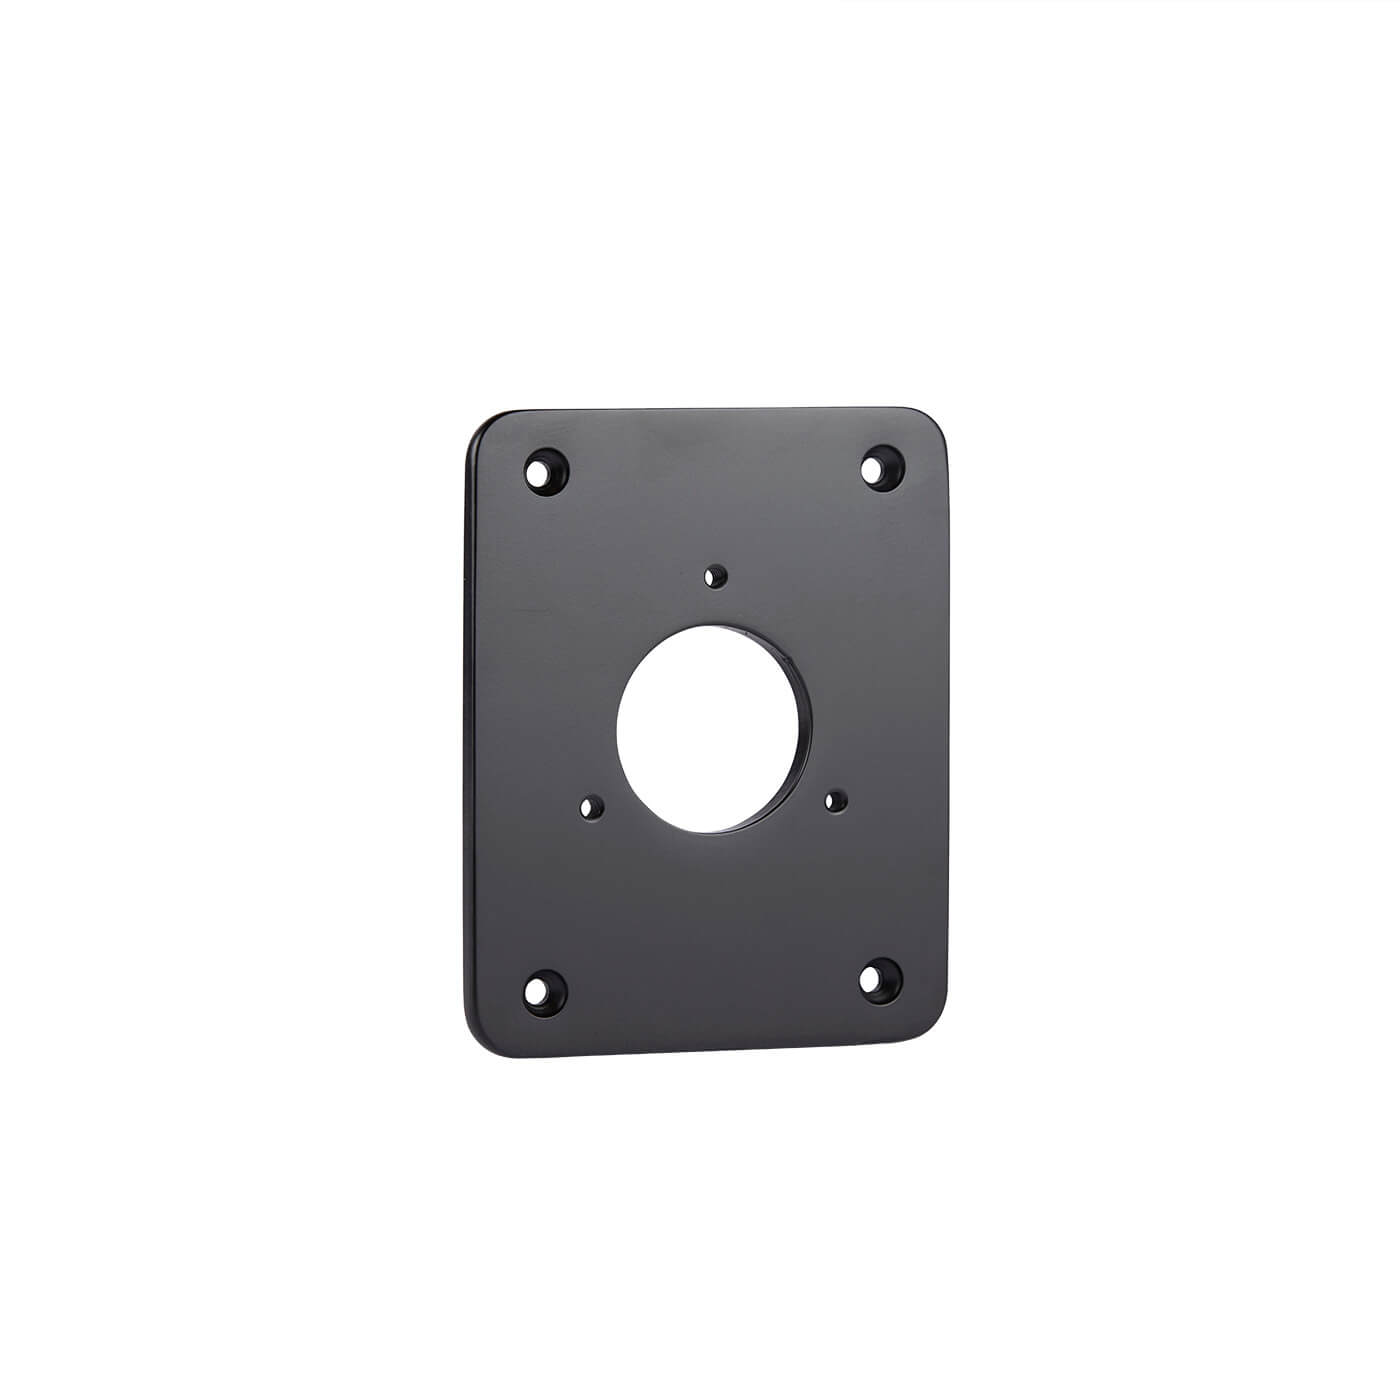 Aquor Mounting Plate V1+ in Matte Black for House Hydrant V1/V1+, Universal Hydrant, Marine Deckwash, and RV City Water Inlet